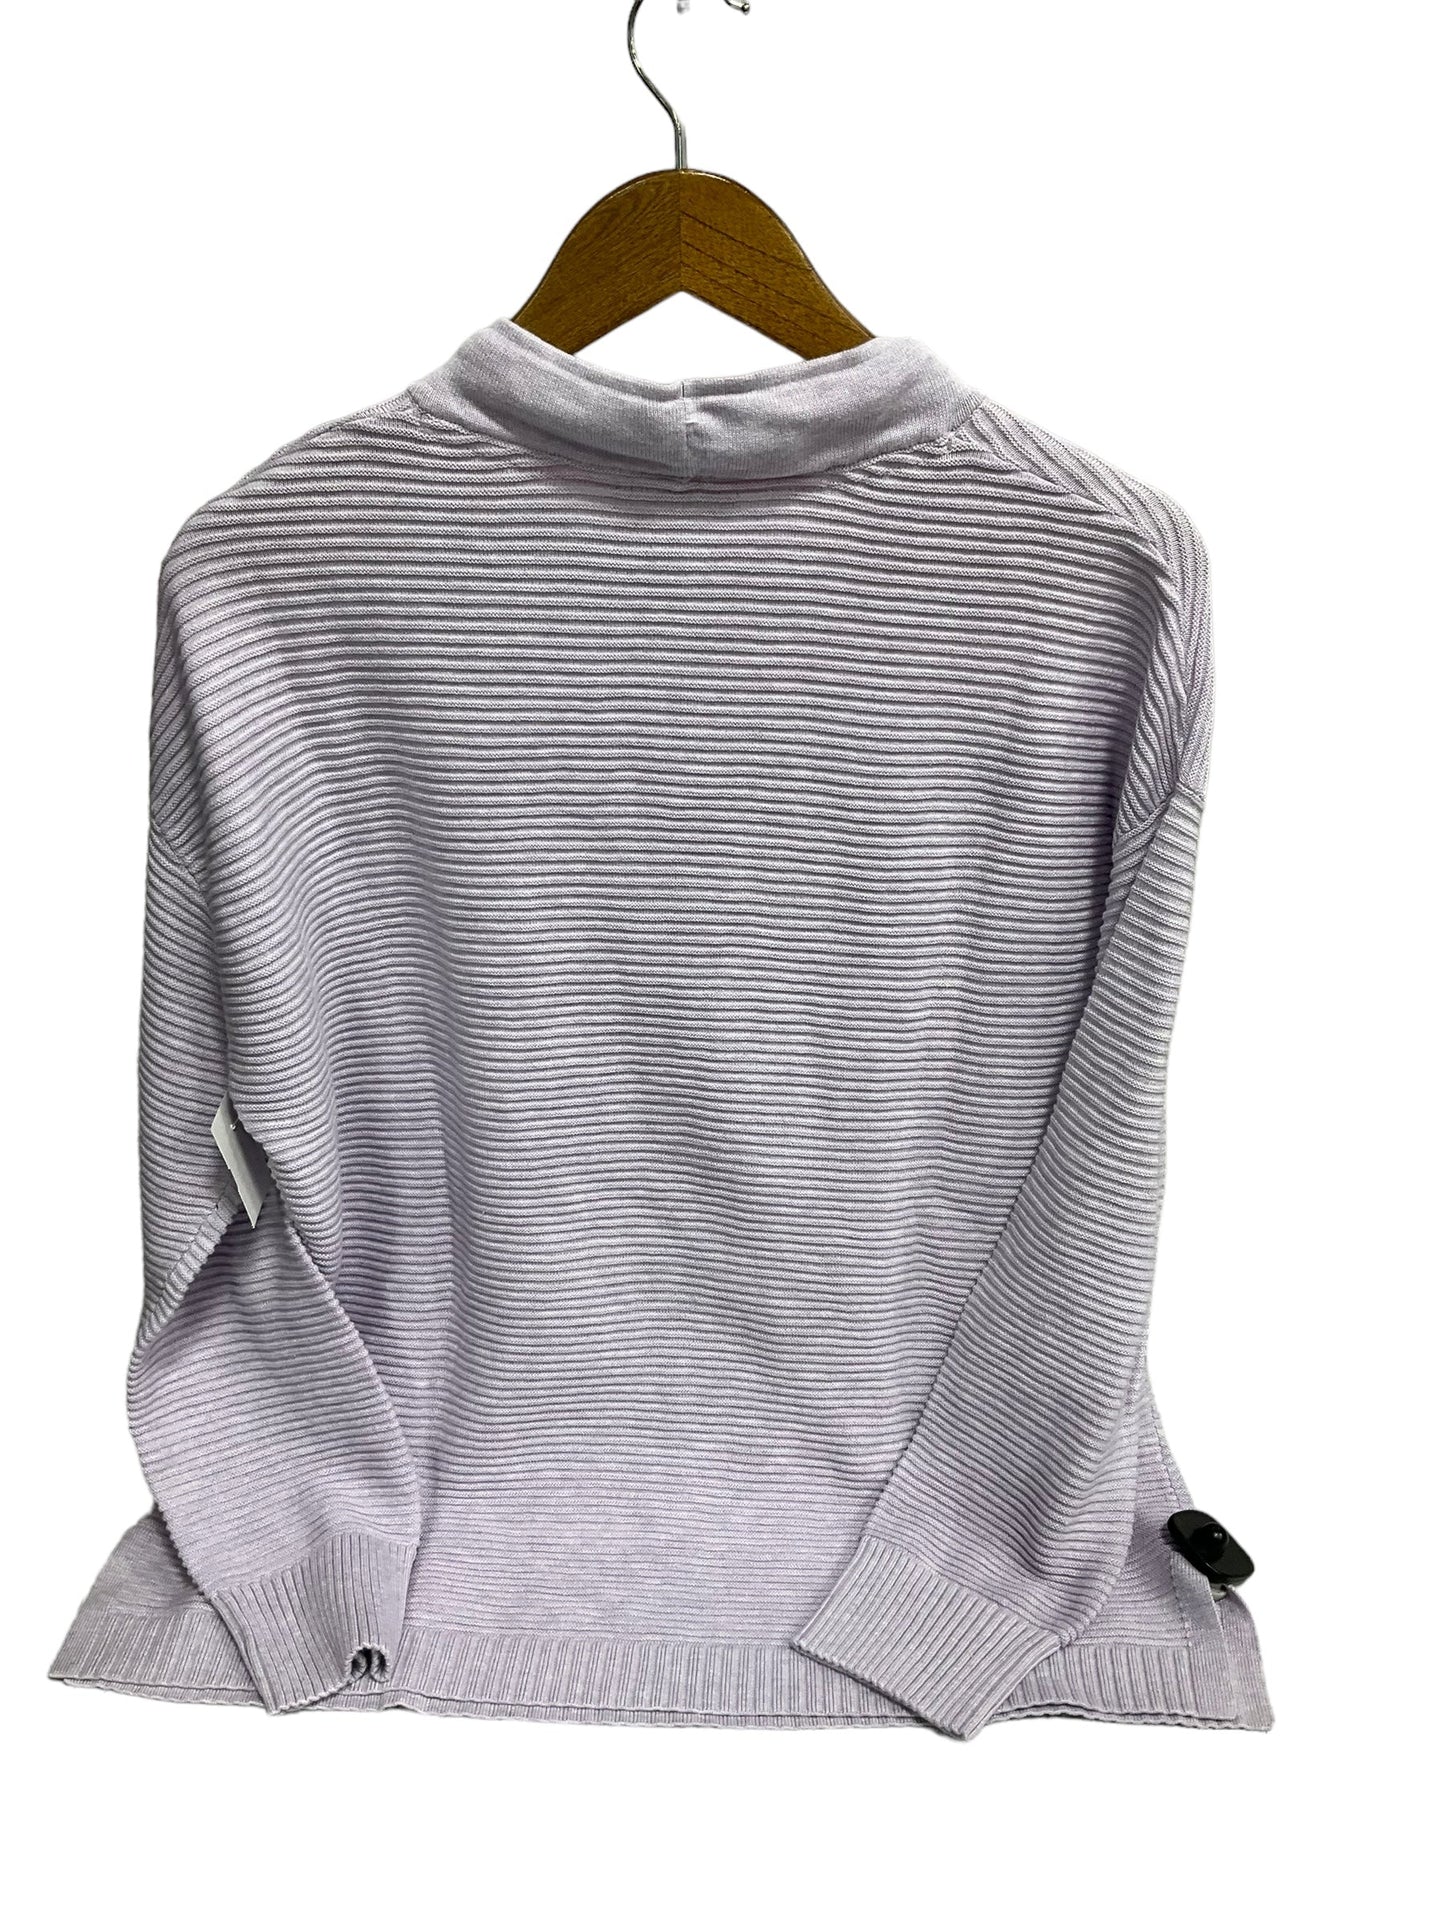 Sweater By Isaac Mizrahi Live Qvc  Size: M